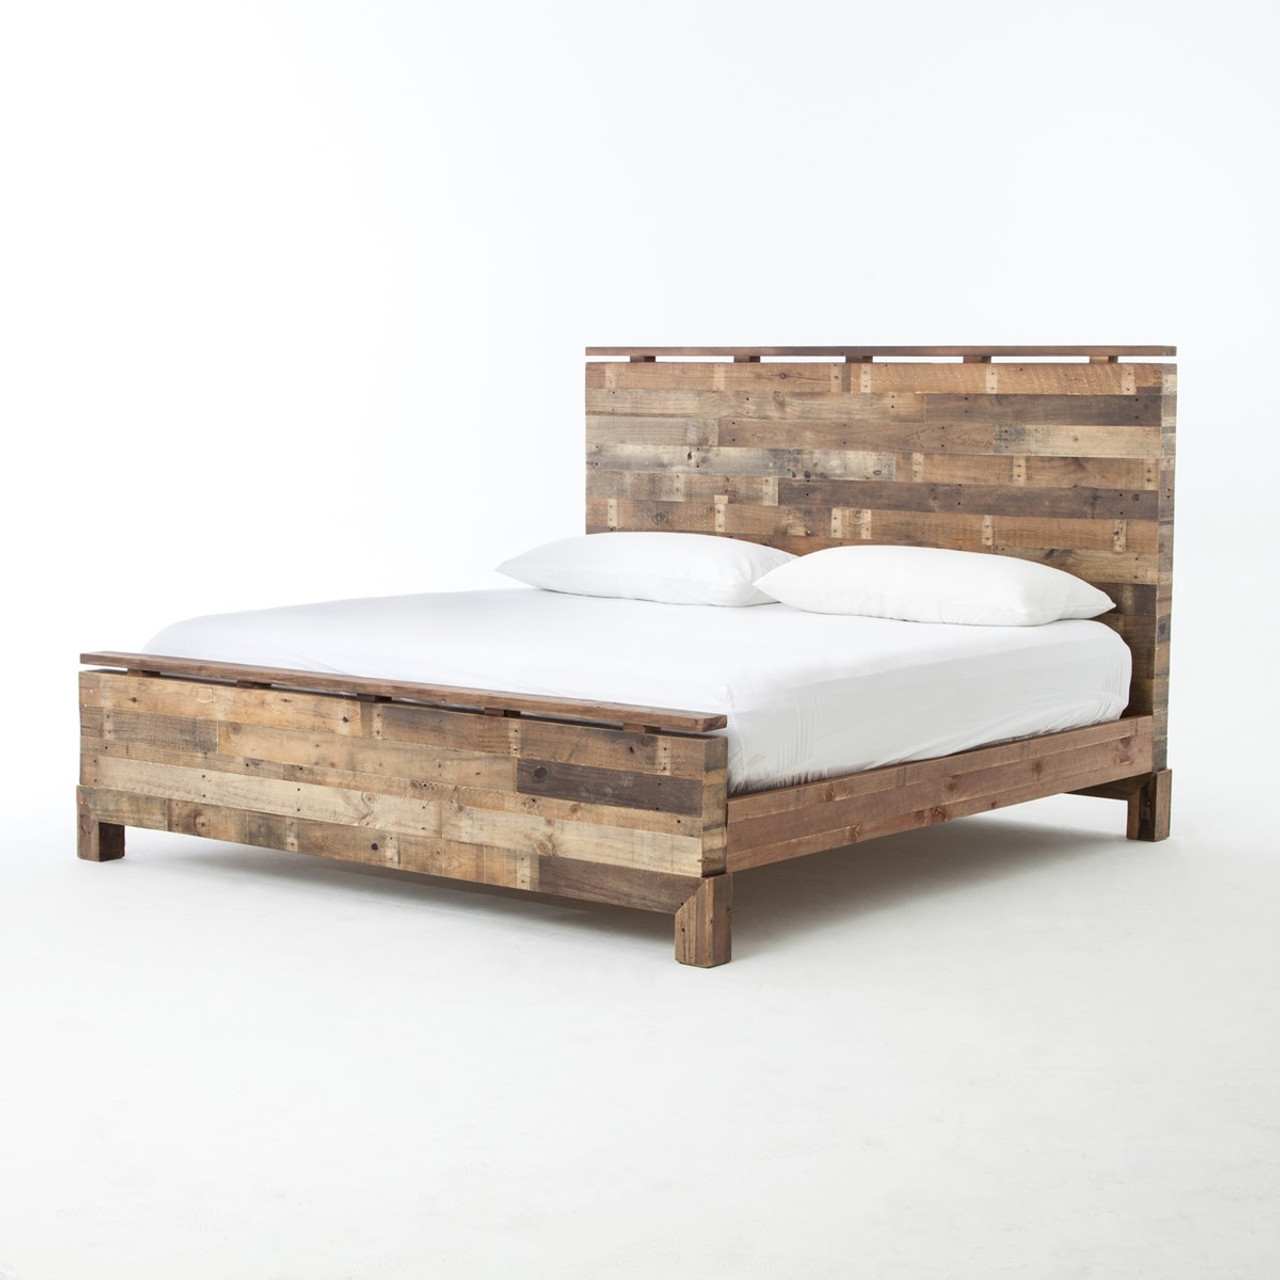 Featured image of post King Size Rustic Wood Bed Frame